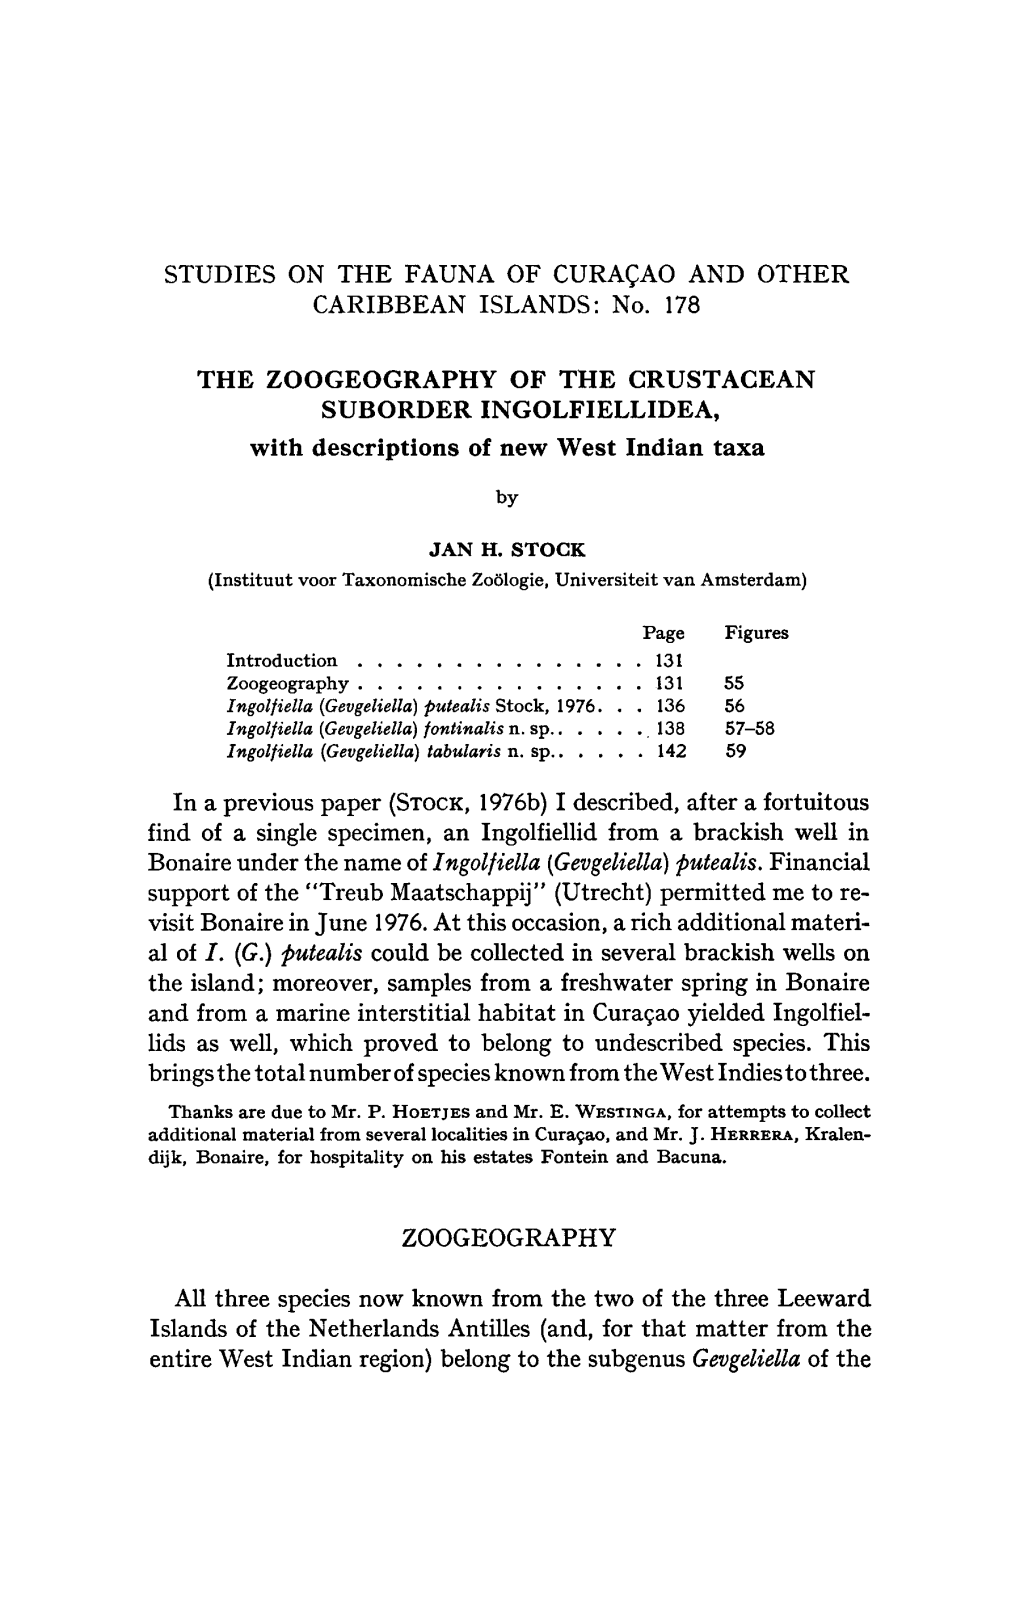 STUDIES on the FAUNA of CURAÇAO and OTHER CARIBBEAN ISLANDS: No. 178